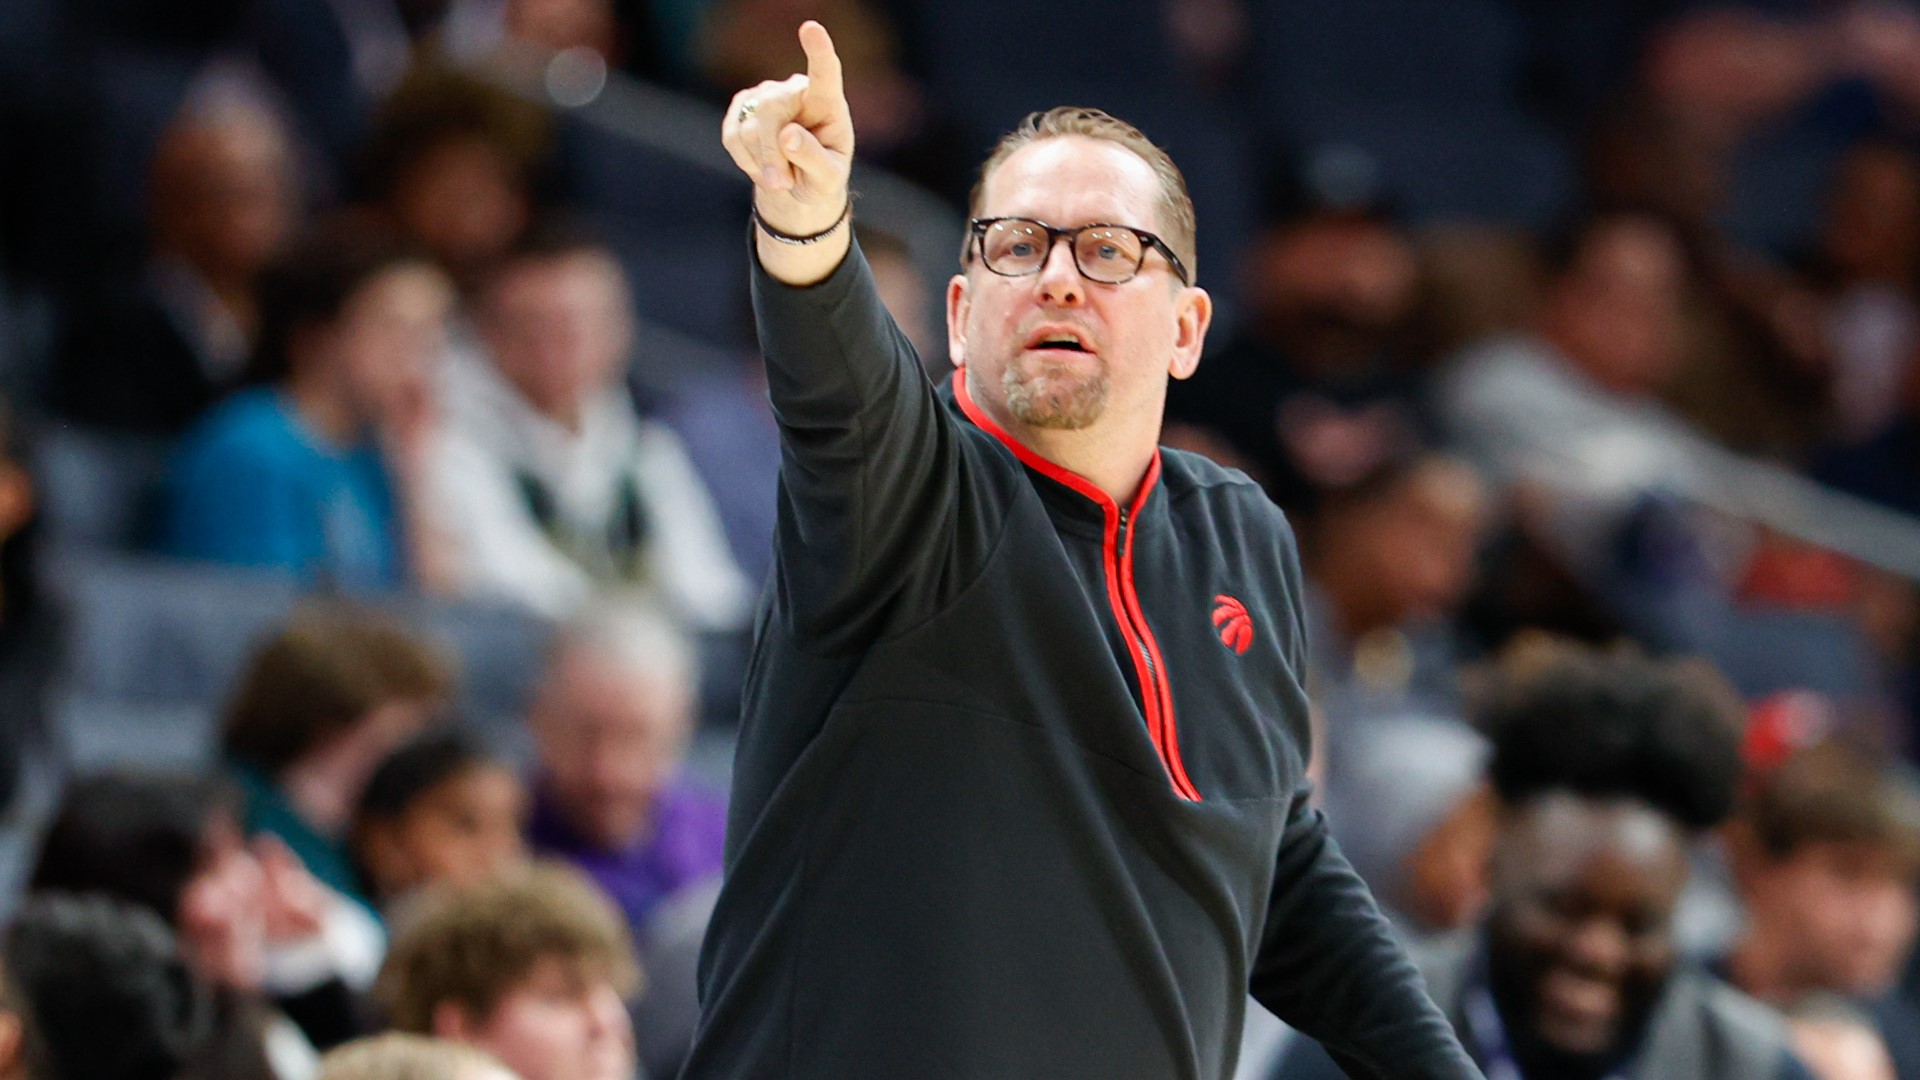 A person with knowledge of the decision says the Philadelphia 76ers have hired coach Nick Nurse weeks after he was fired by the Toronto Raptors.